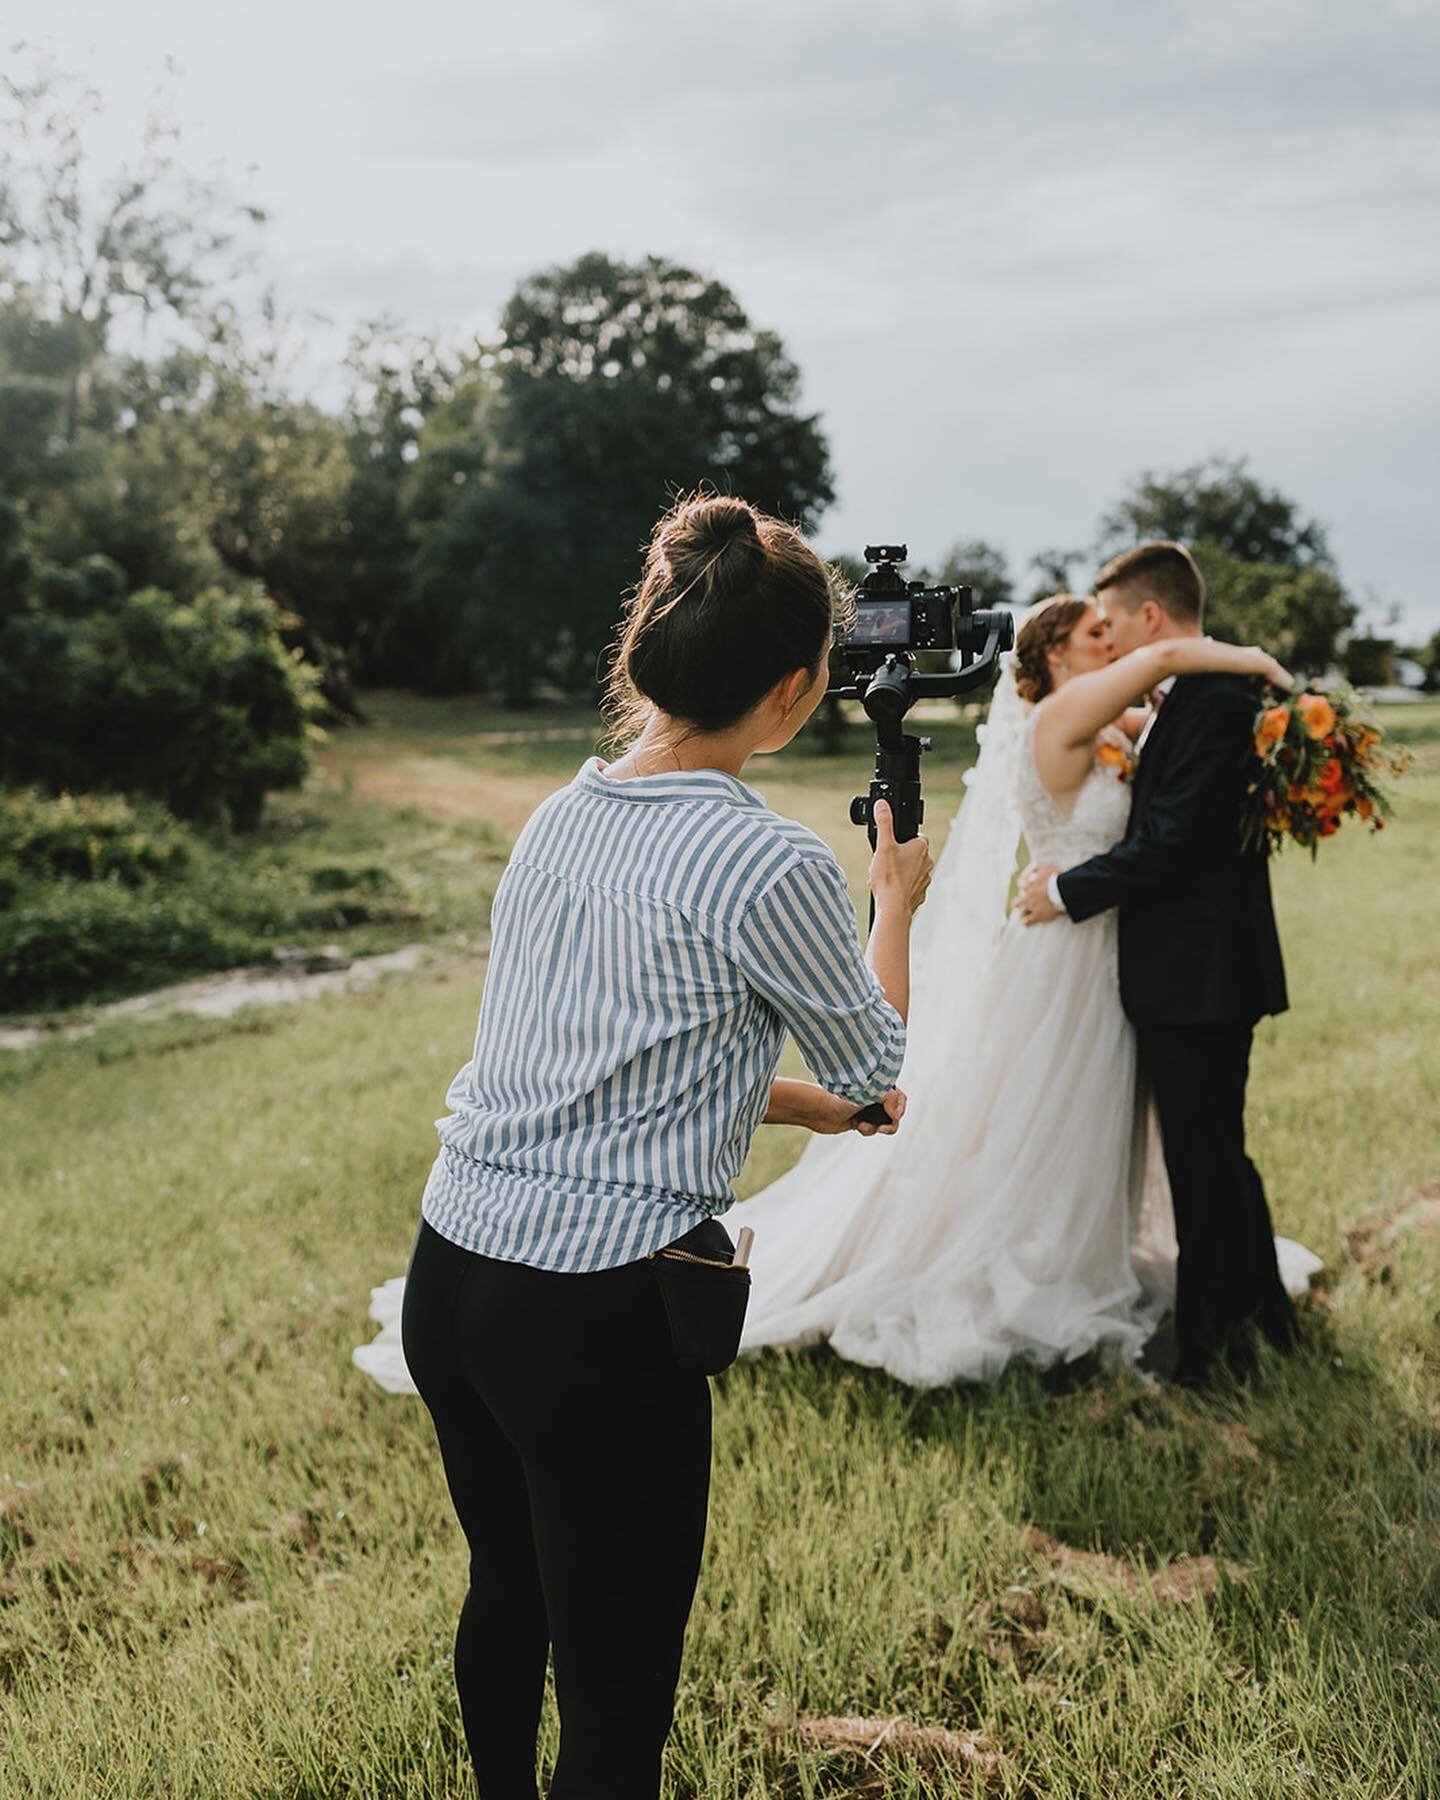 Rachel here  While I love filming real weddings, styled shoots like these give us creatives so much freedom to play!  (photo by Gracefully Captured)